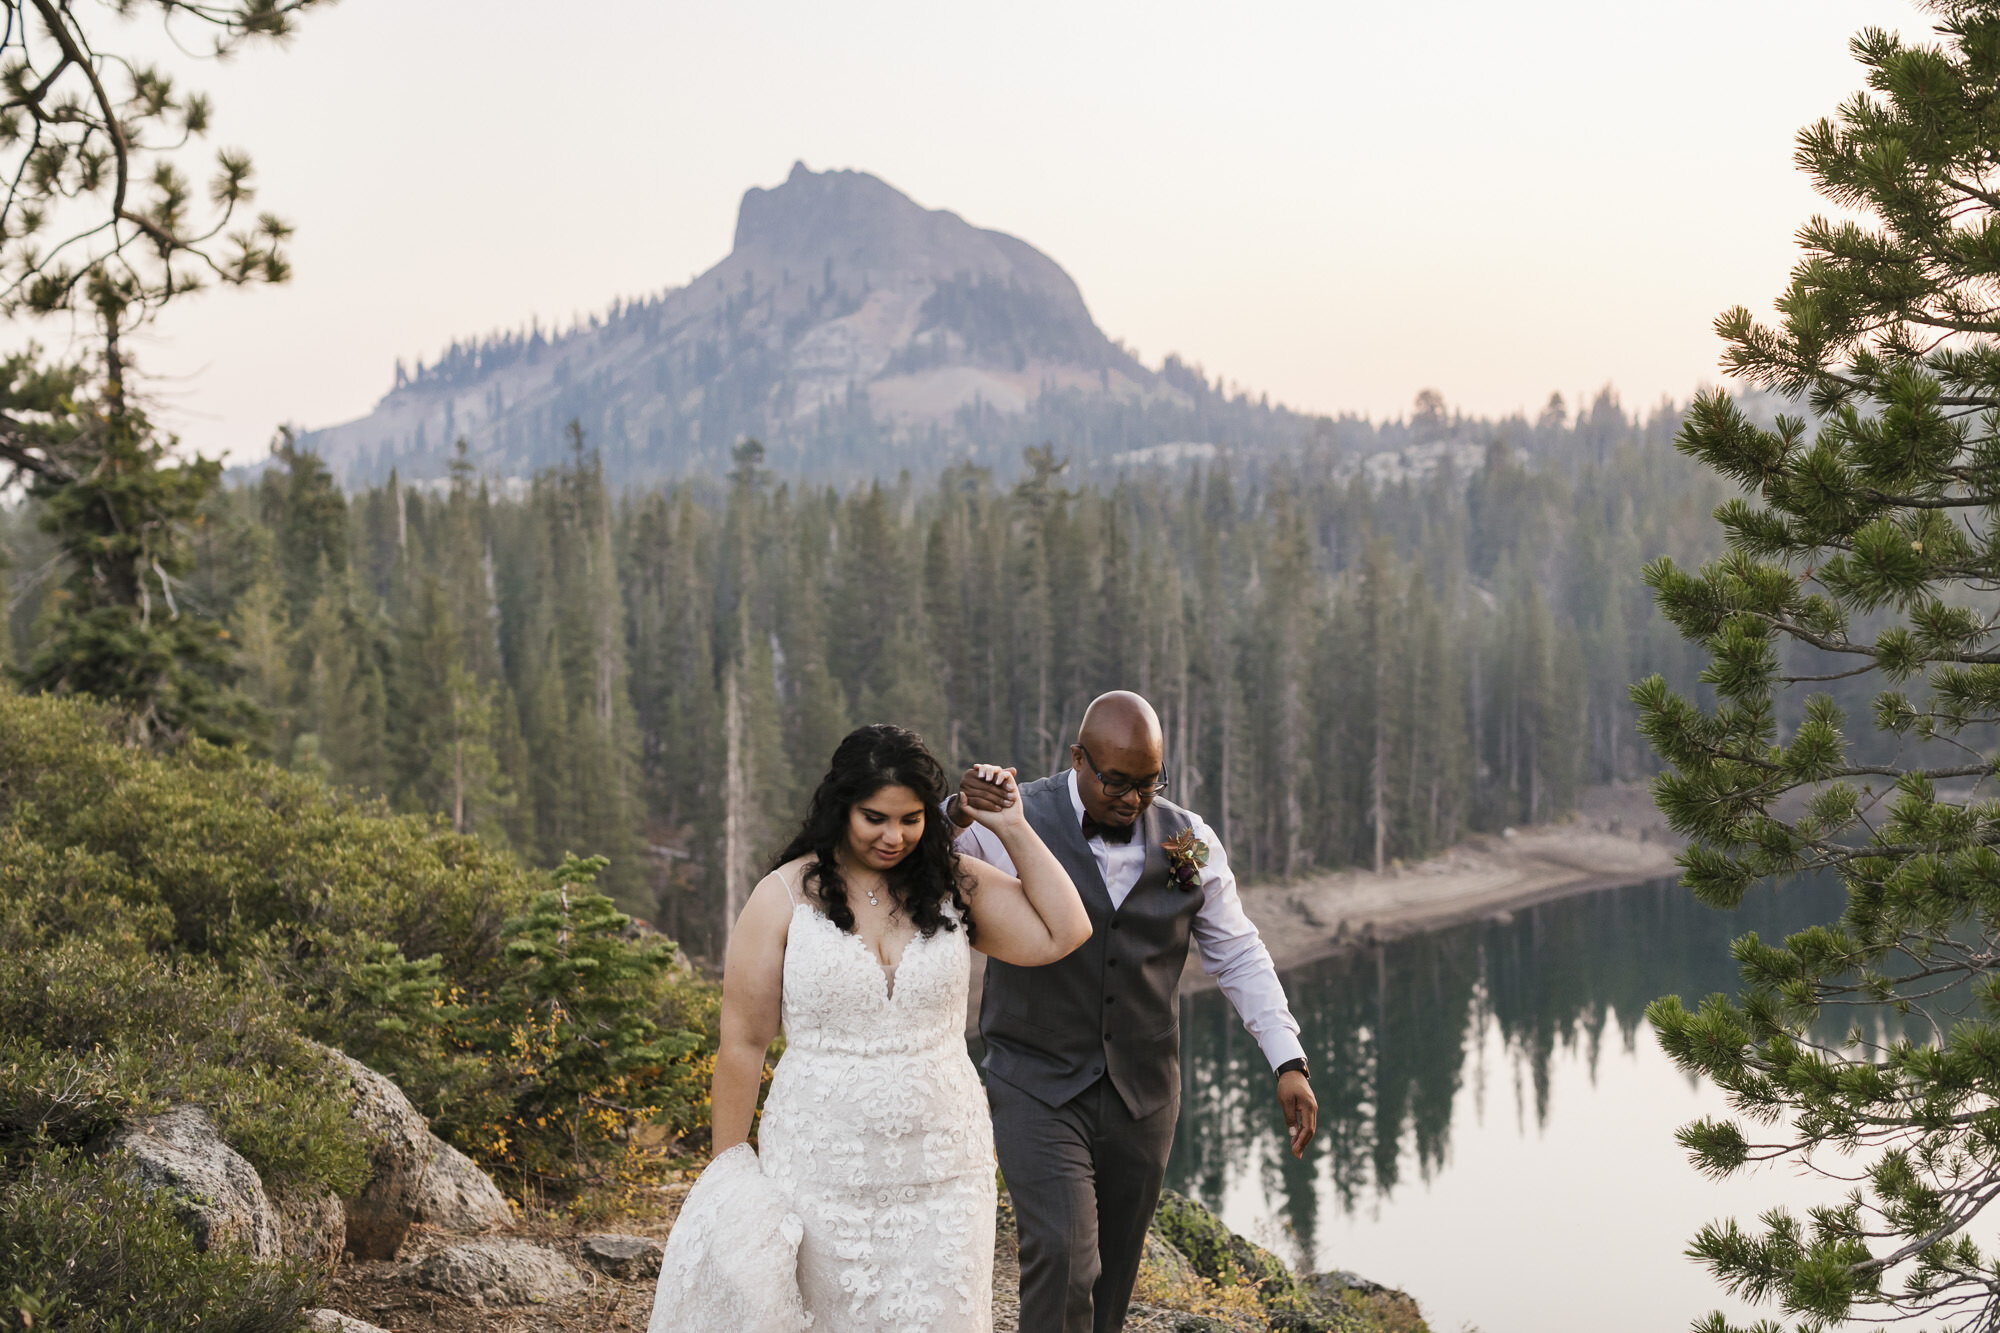 Wedding couple walk holding hands with mountain peak behind them in Tahoe forest